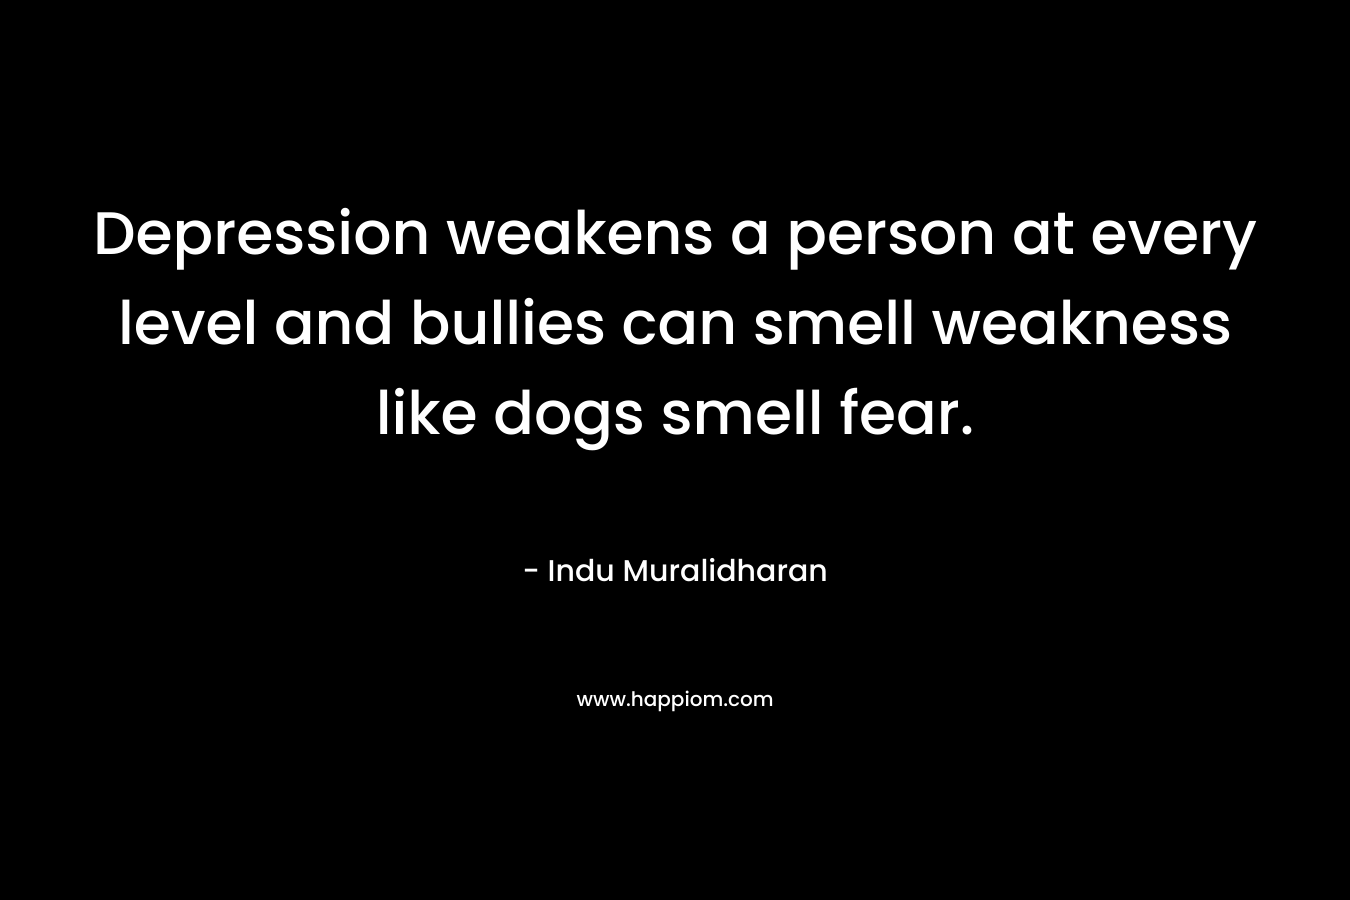 Depression weakens a person at every level and bullies can smell weakness like dogs smell fear.